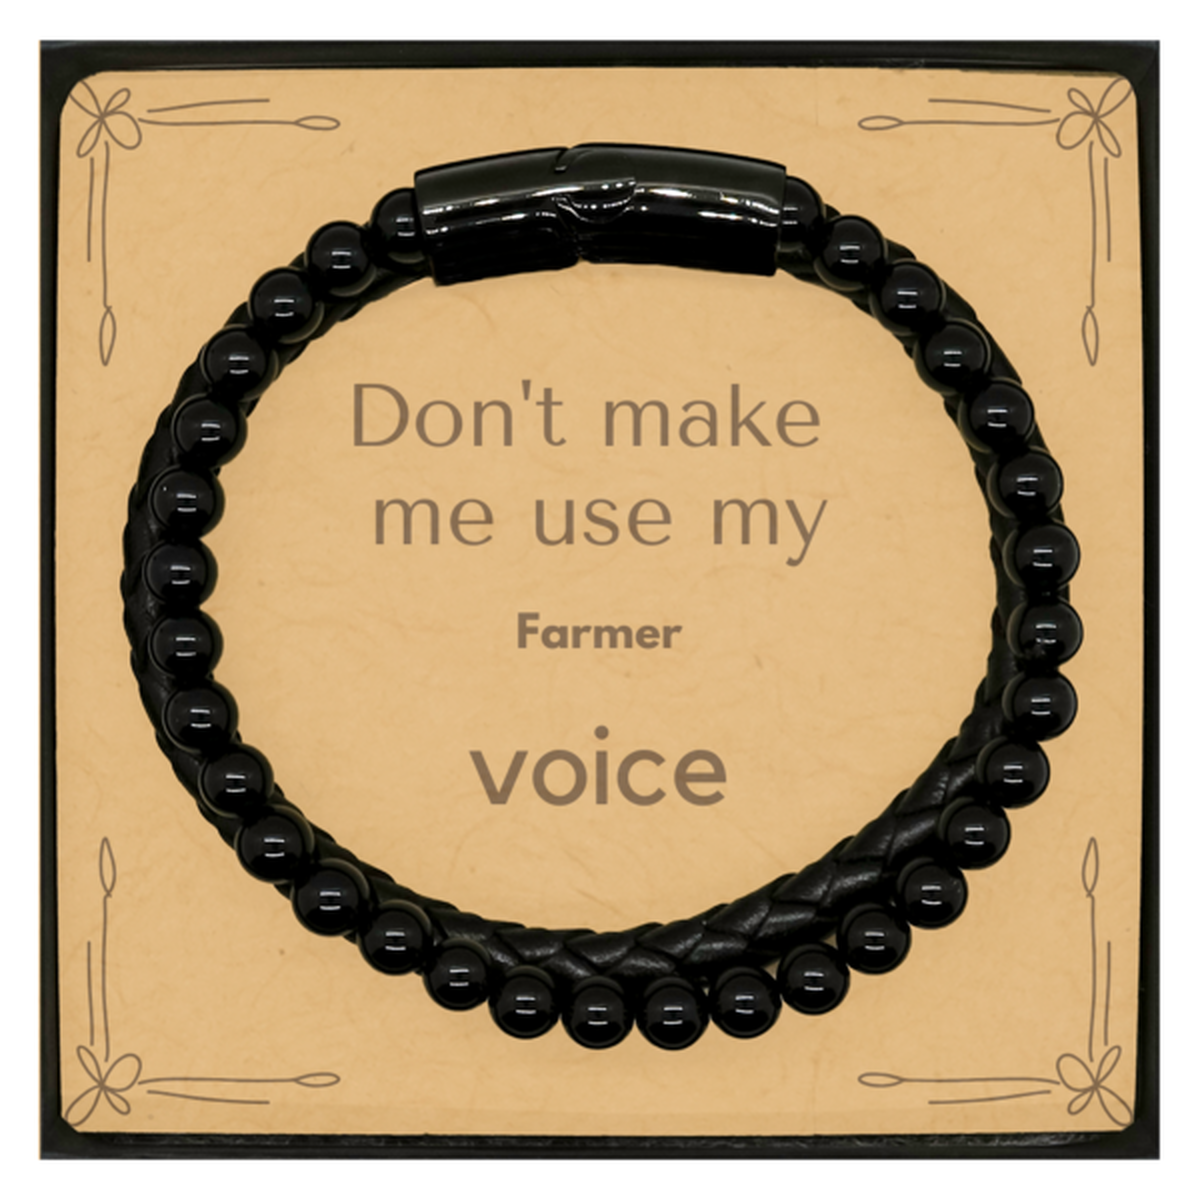 Don't make me use my Farmer voice, Sarcasm Farmer Card Gifts, Christmas Farmer Stone Leather Bracelets Birthday Unique Gifts For Farmer Coworkers, Men, Women, Colleague, Friends